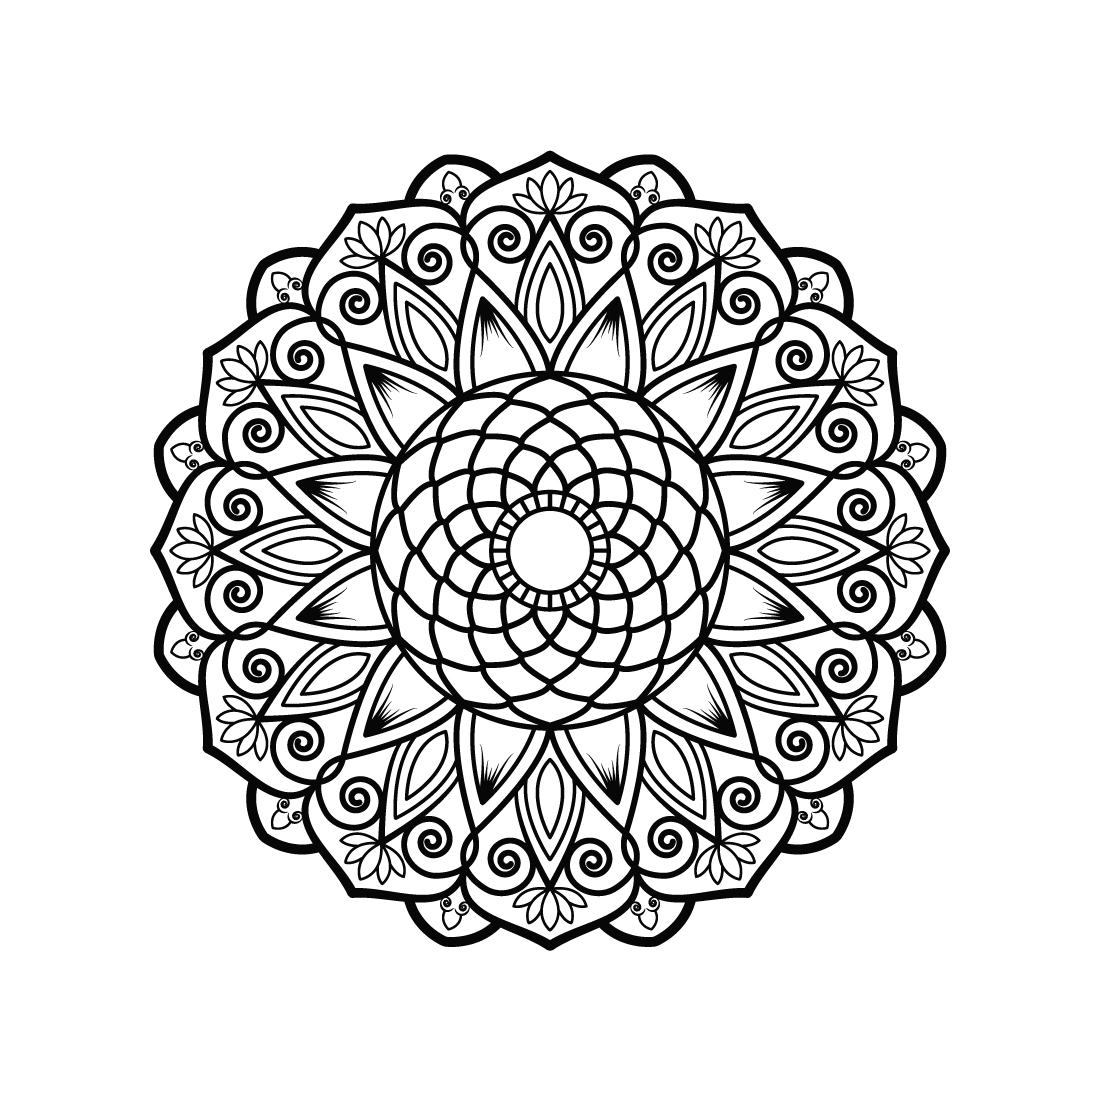 B-there Adult Coloring Books Over 125 Different Designs Combined Mandala Coloring Books for Adults with Detailed Flower Designs